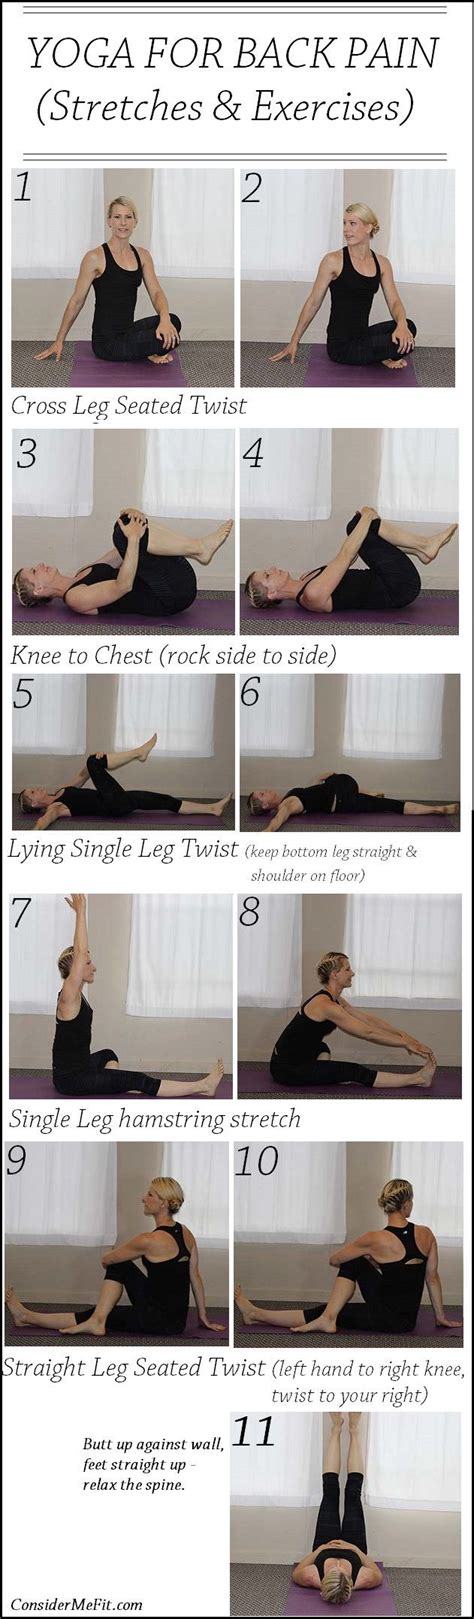 These exercises will bring you the relief you've been craving. Yoga Eases Symptoms of Chronic Low Back Pain (STUDY)